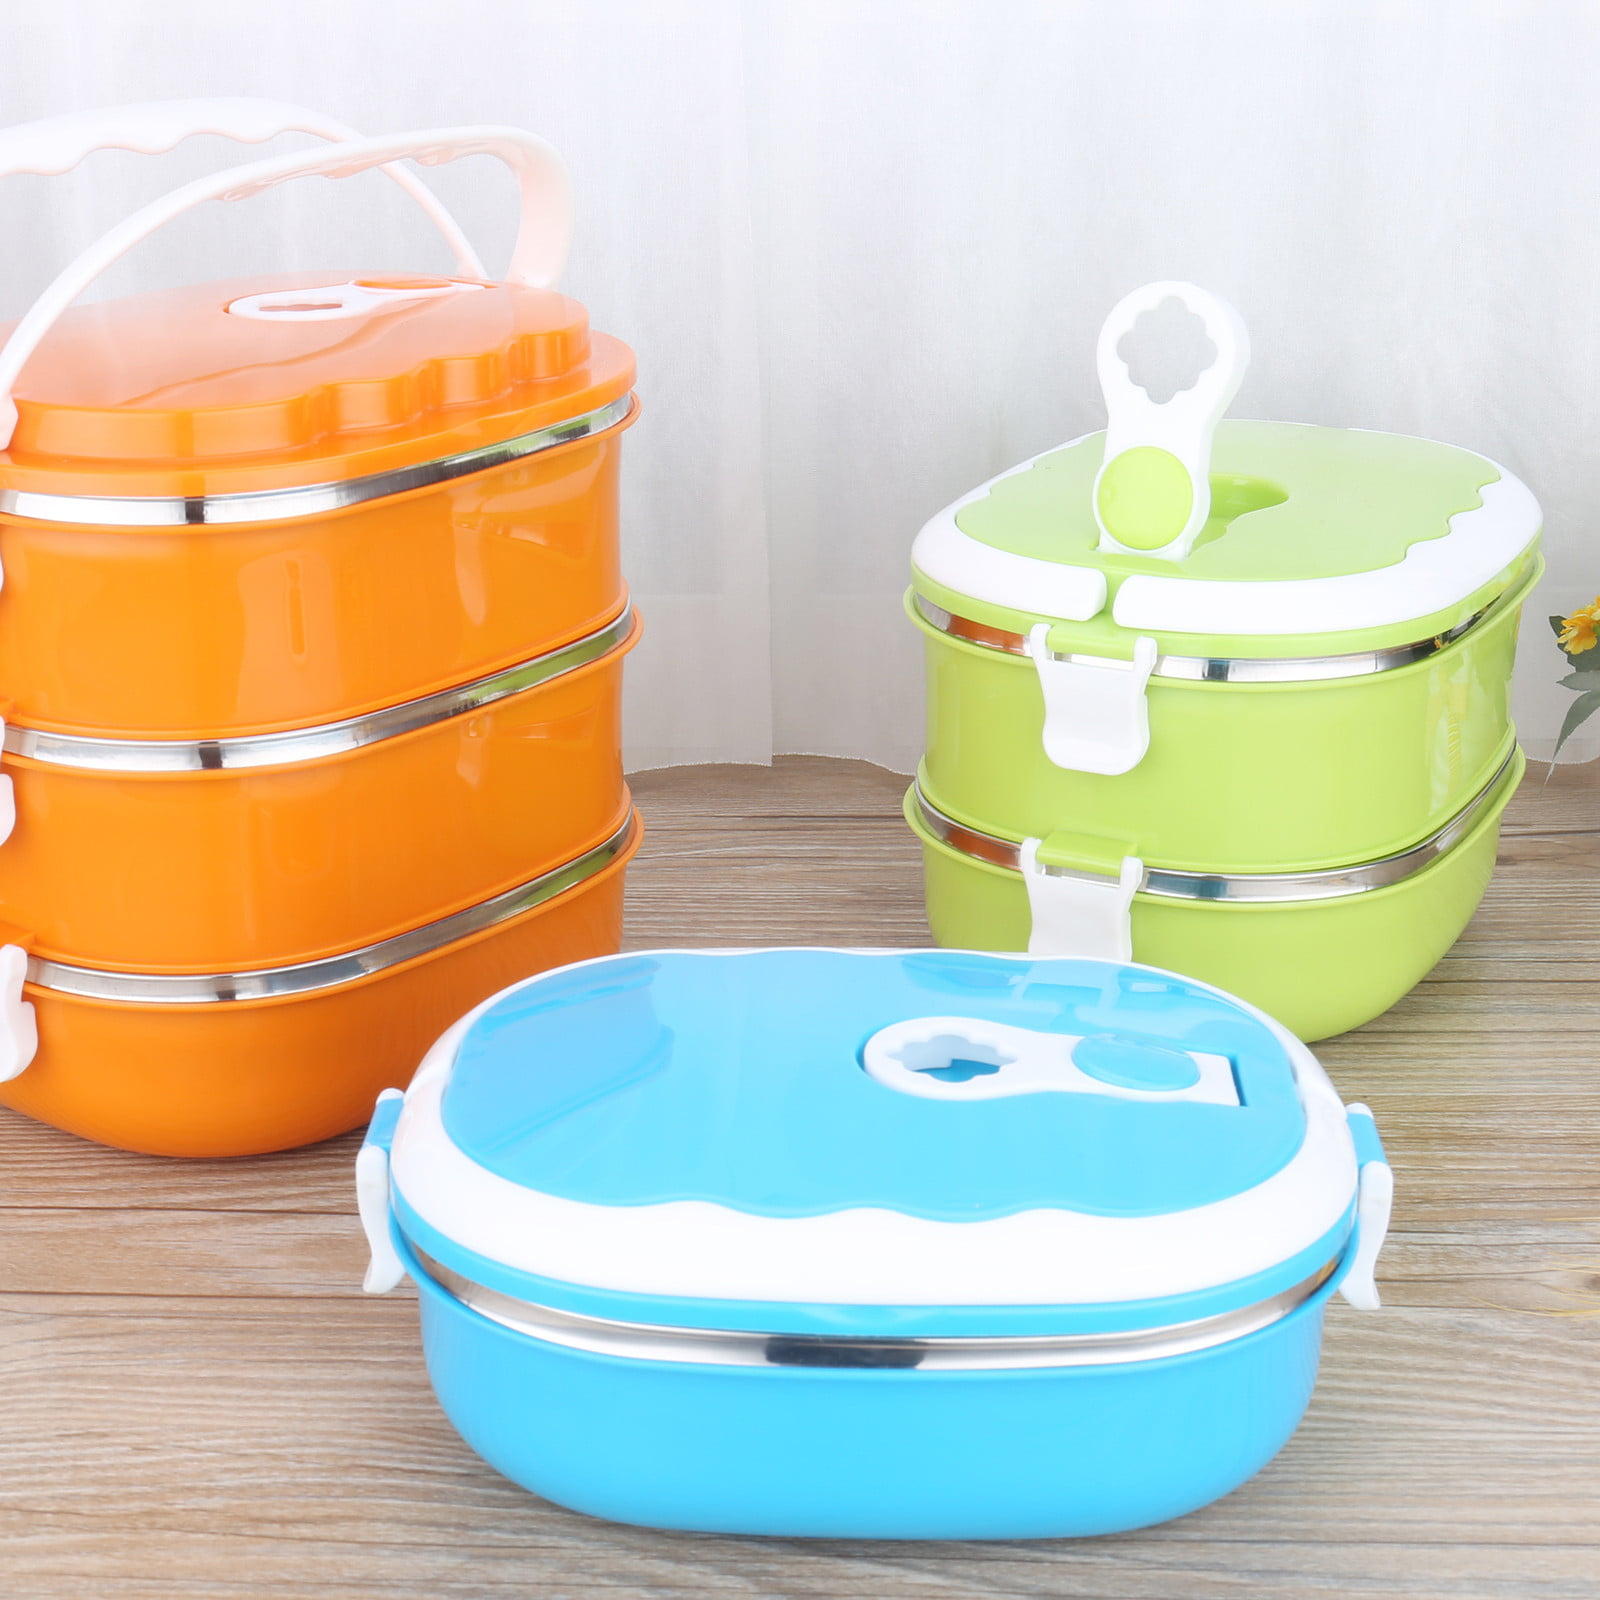 Lunch Box, Insulated Leakproof Lid, Plastic Silicone Container, Hot Food  Lunch Boxes, Leakproof Food Container, For Teenagers And Workers At School,  Canteen, Back School, For Camping And Picnic, Home Kitchen Supplies 